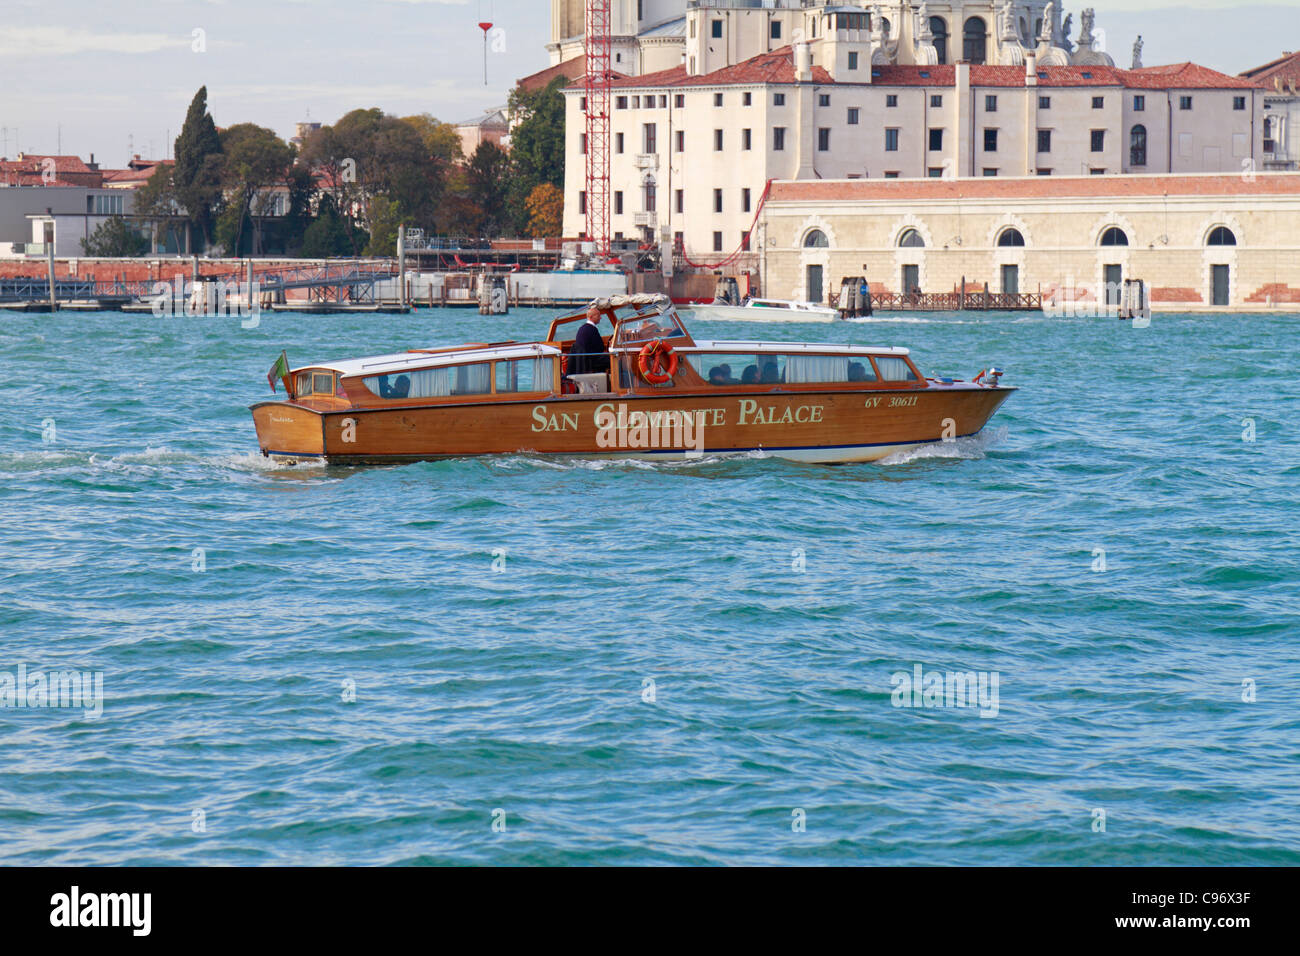 The San Clemente Palace private motor launch taking guests to St Marks square, Venice, Italy, Europe. Stock Photo